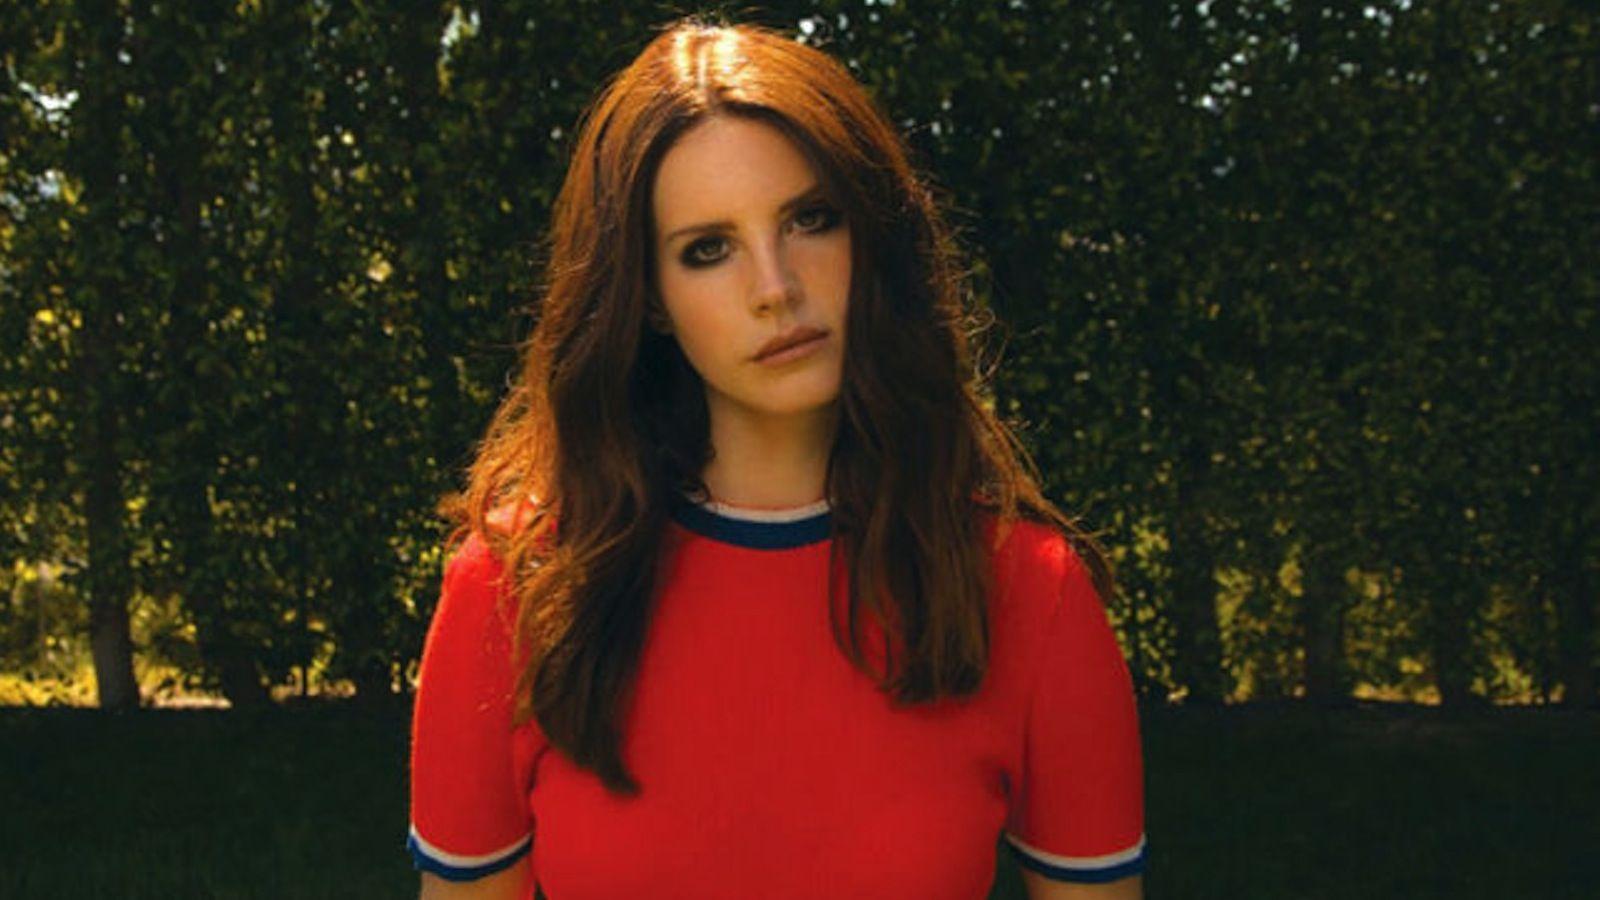 Lana Del Rey Isn't Anti Feminist, She'd Just Rather Focus On Other